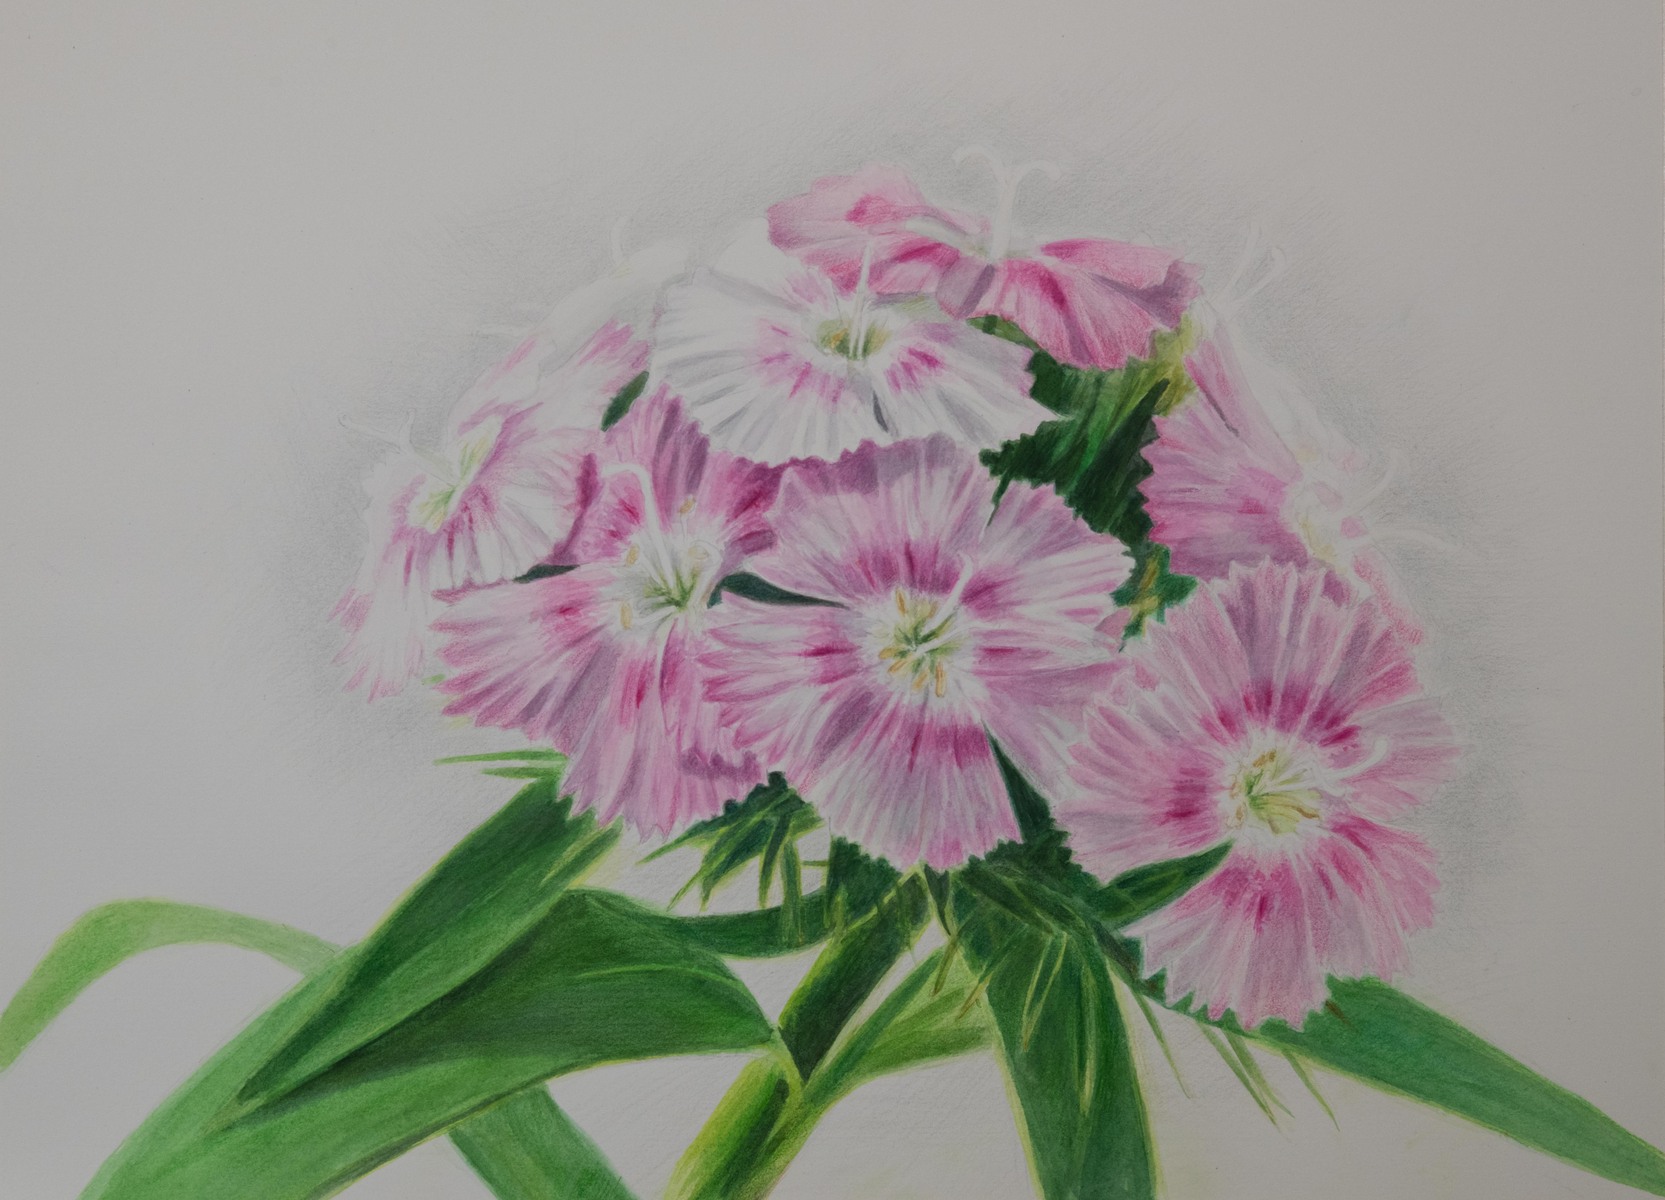 Sweet William Dianthus Follower  11" X 15" Watercolor and Colored Pencil on Hot Press Watercolor Paper